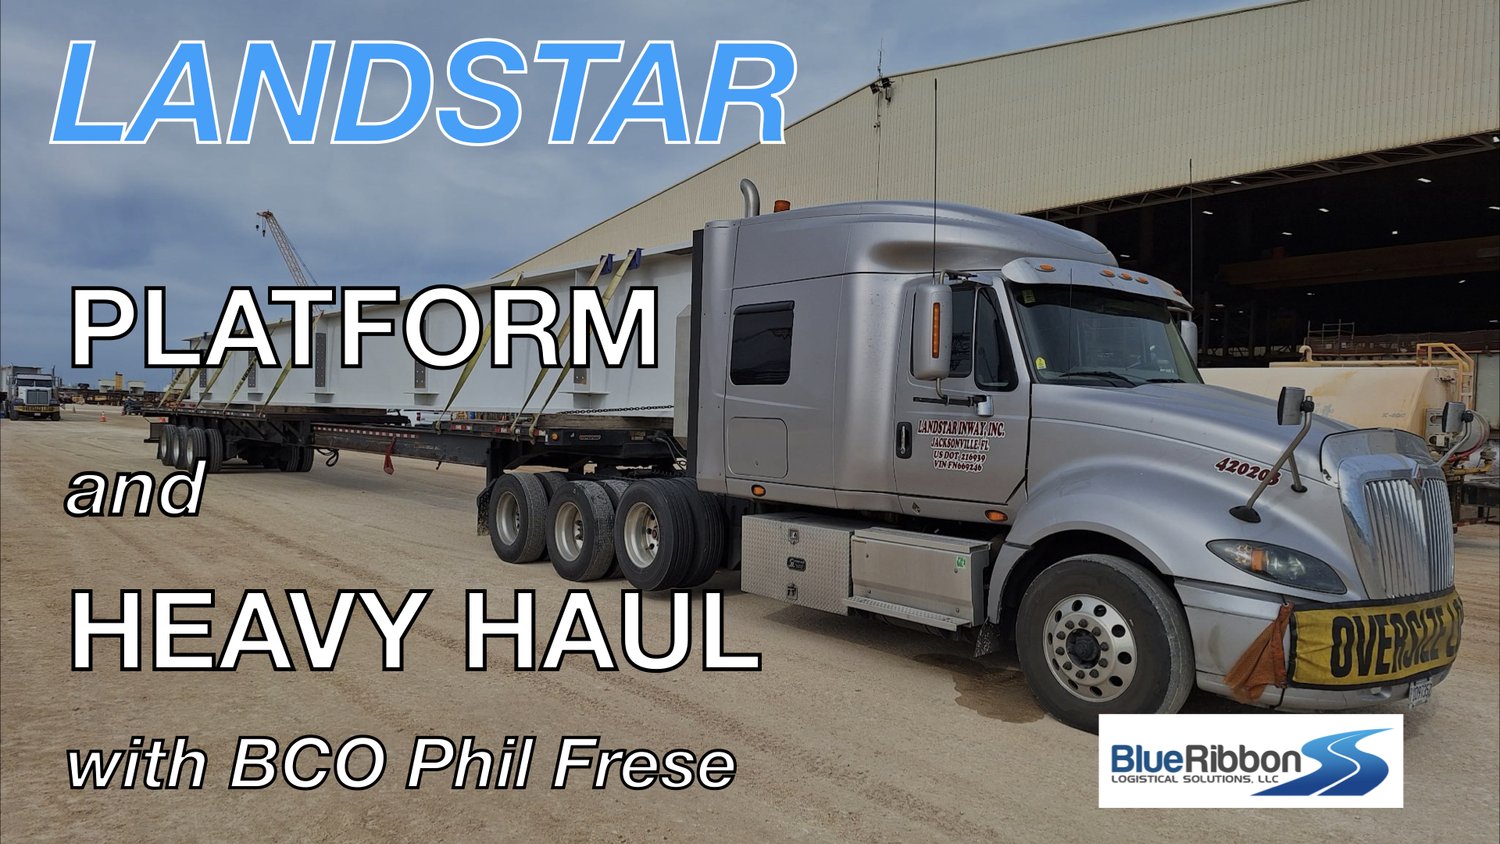 Episode 199: Landstar Heavy Haul and Platform with BCO Phil Frese